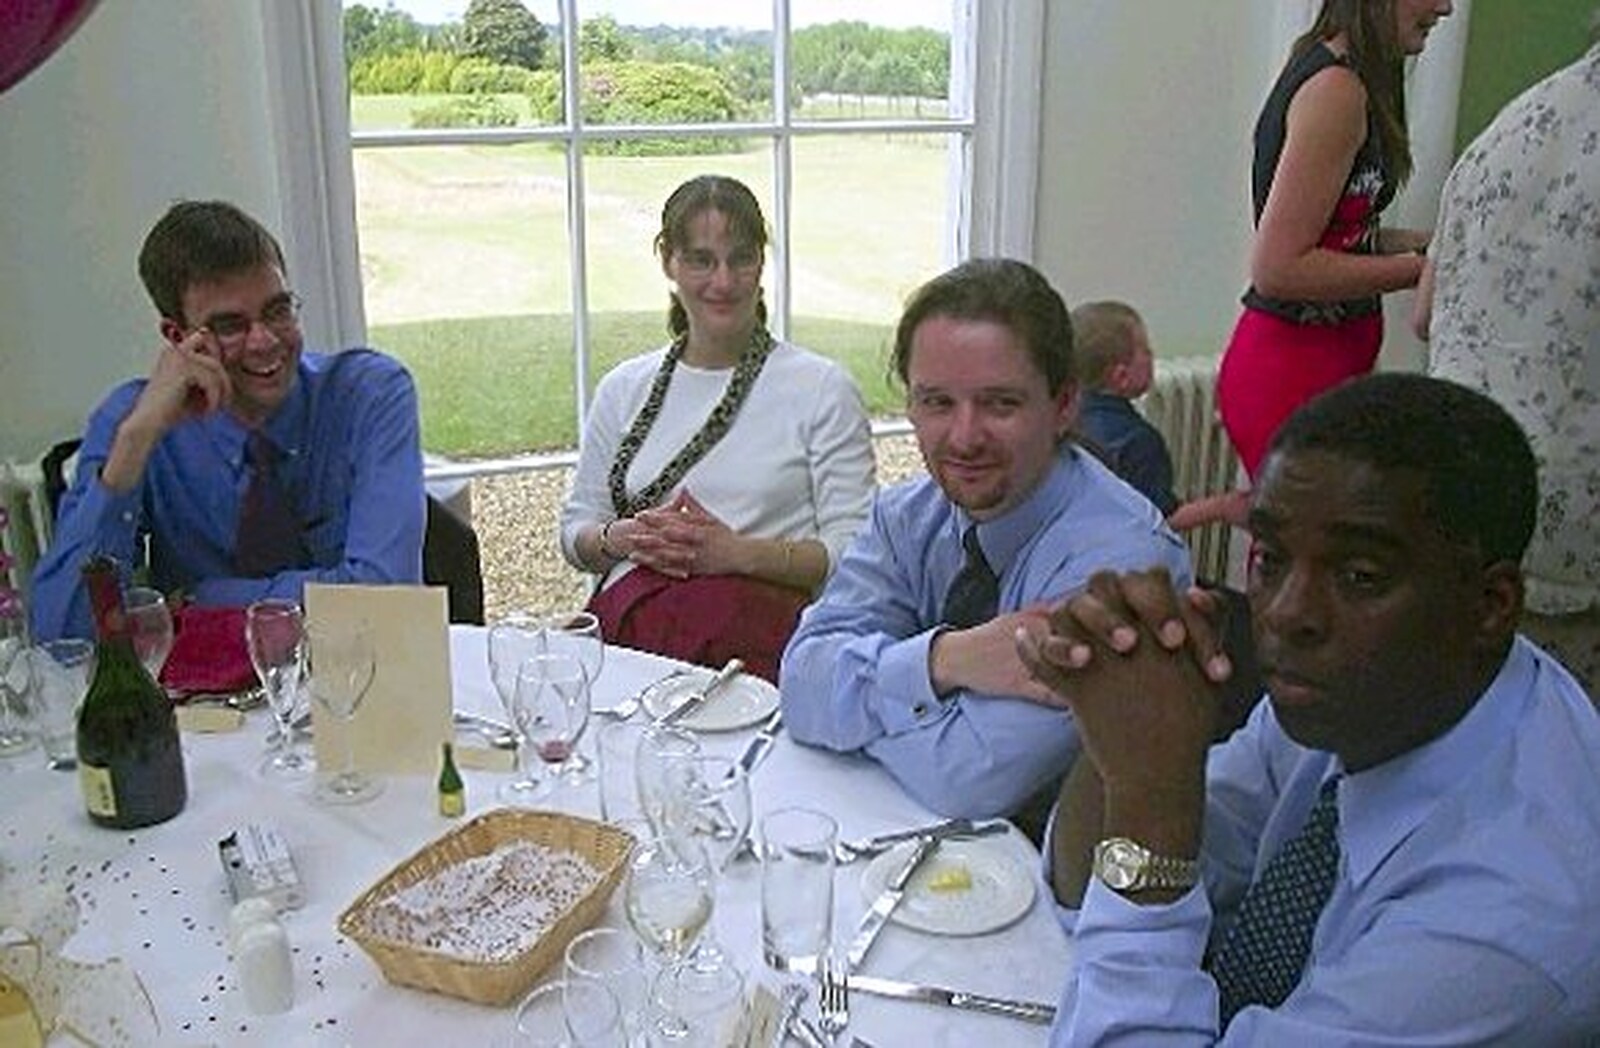 Dan, Becky, Fenton and Carl from Phil and Lisa's Wedding, Woolverston Hall, Ipswich, Suffolk - 1st July 2001